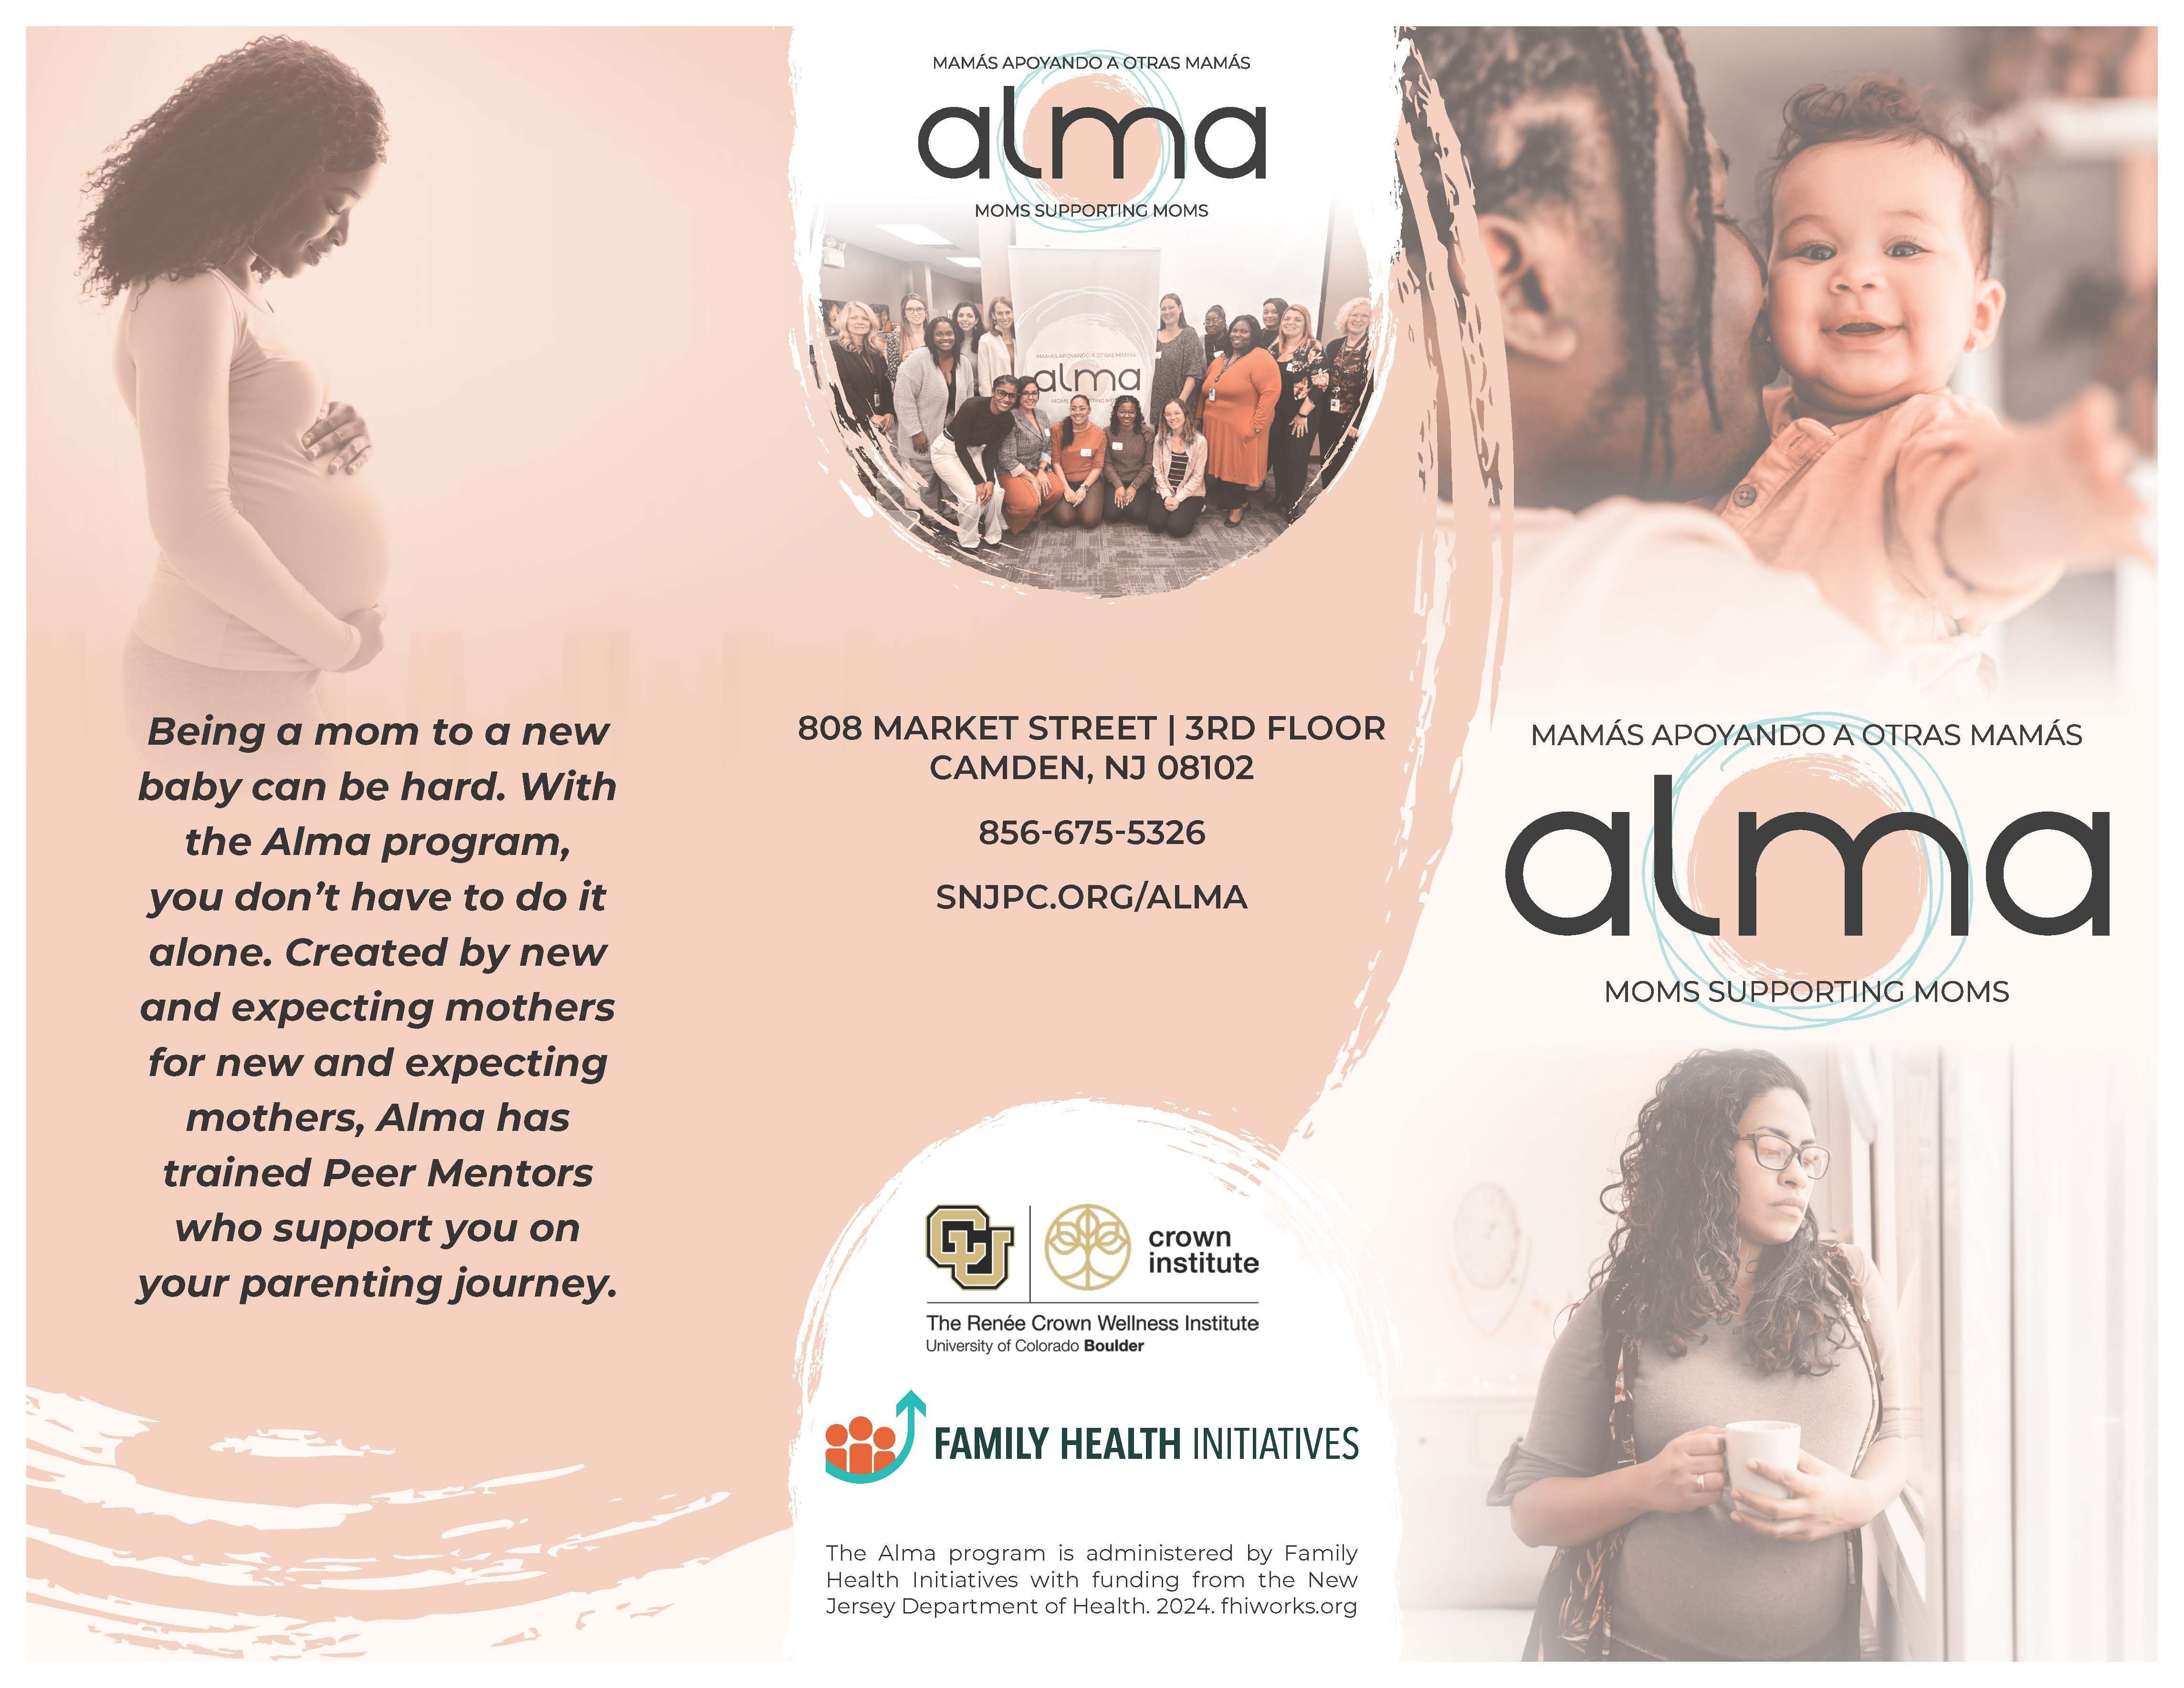 Introducing Alma: A Beacon of Hope for New and Expecting Parents in New Jersey